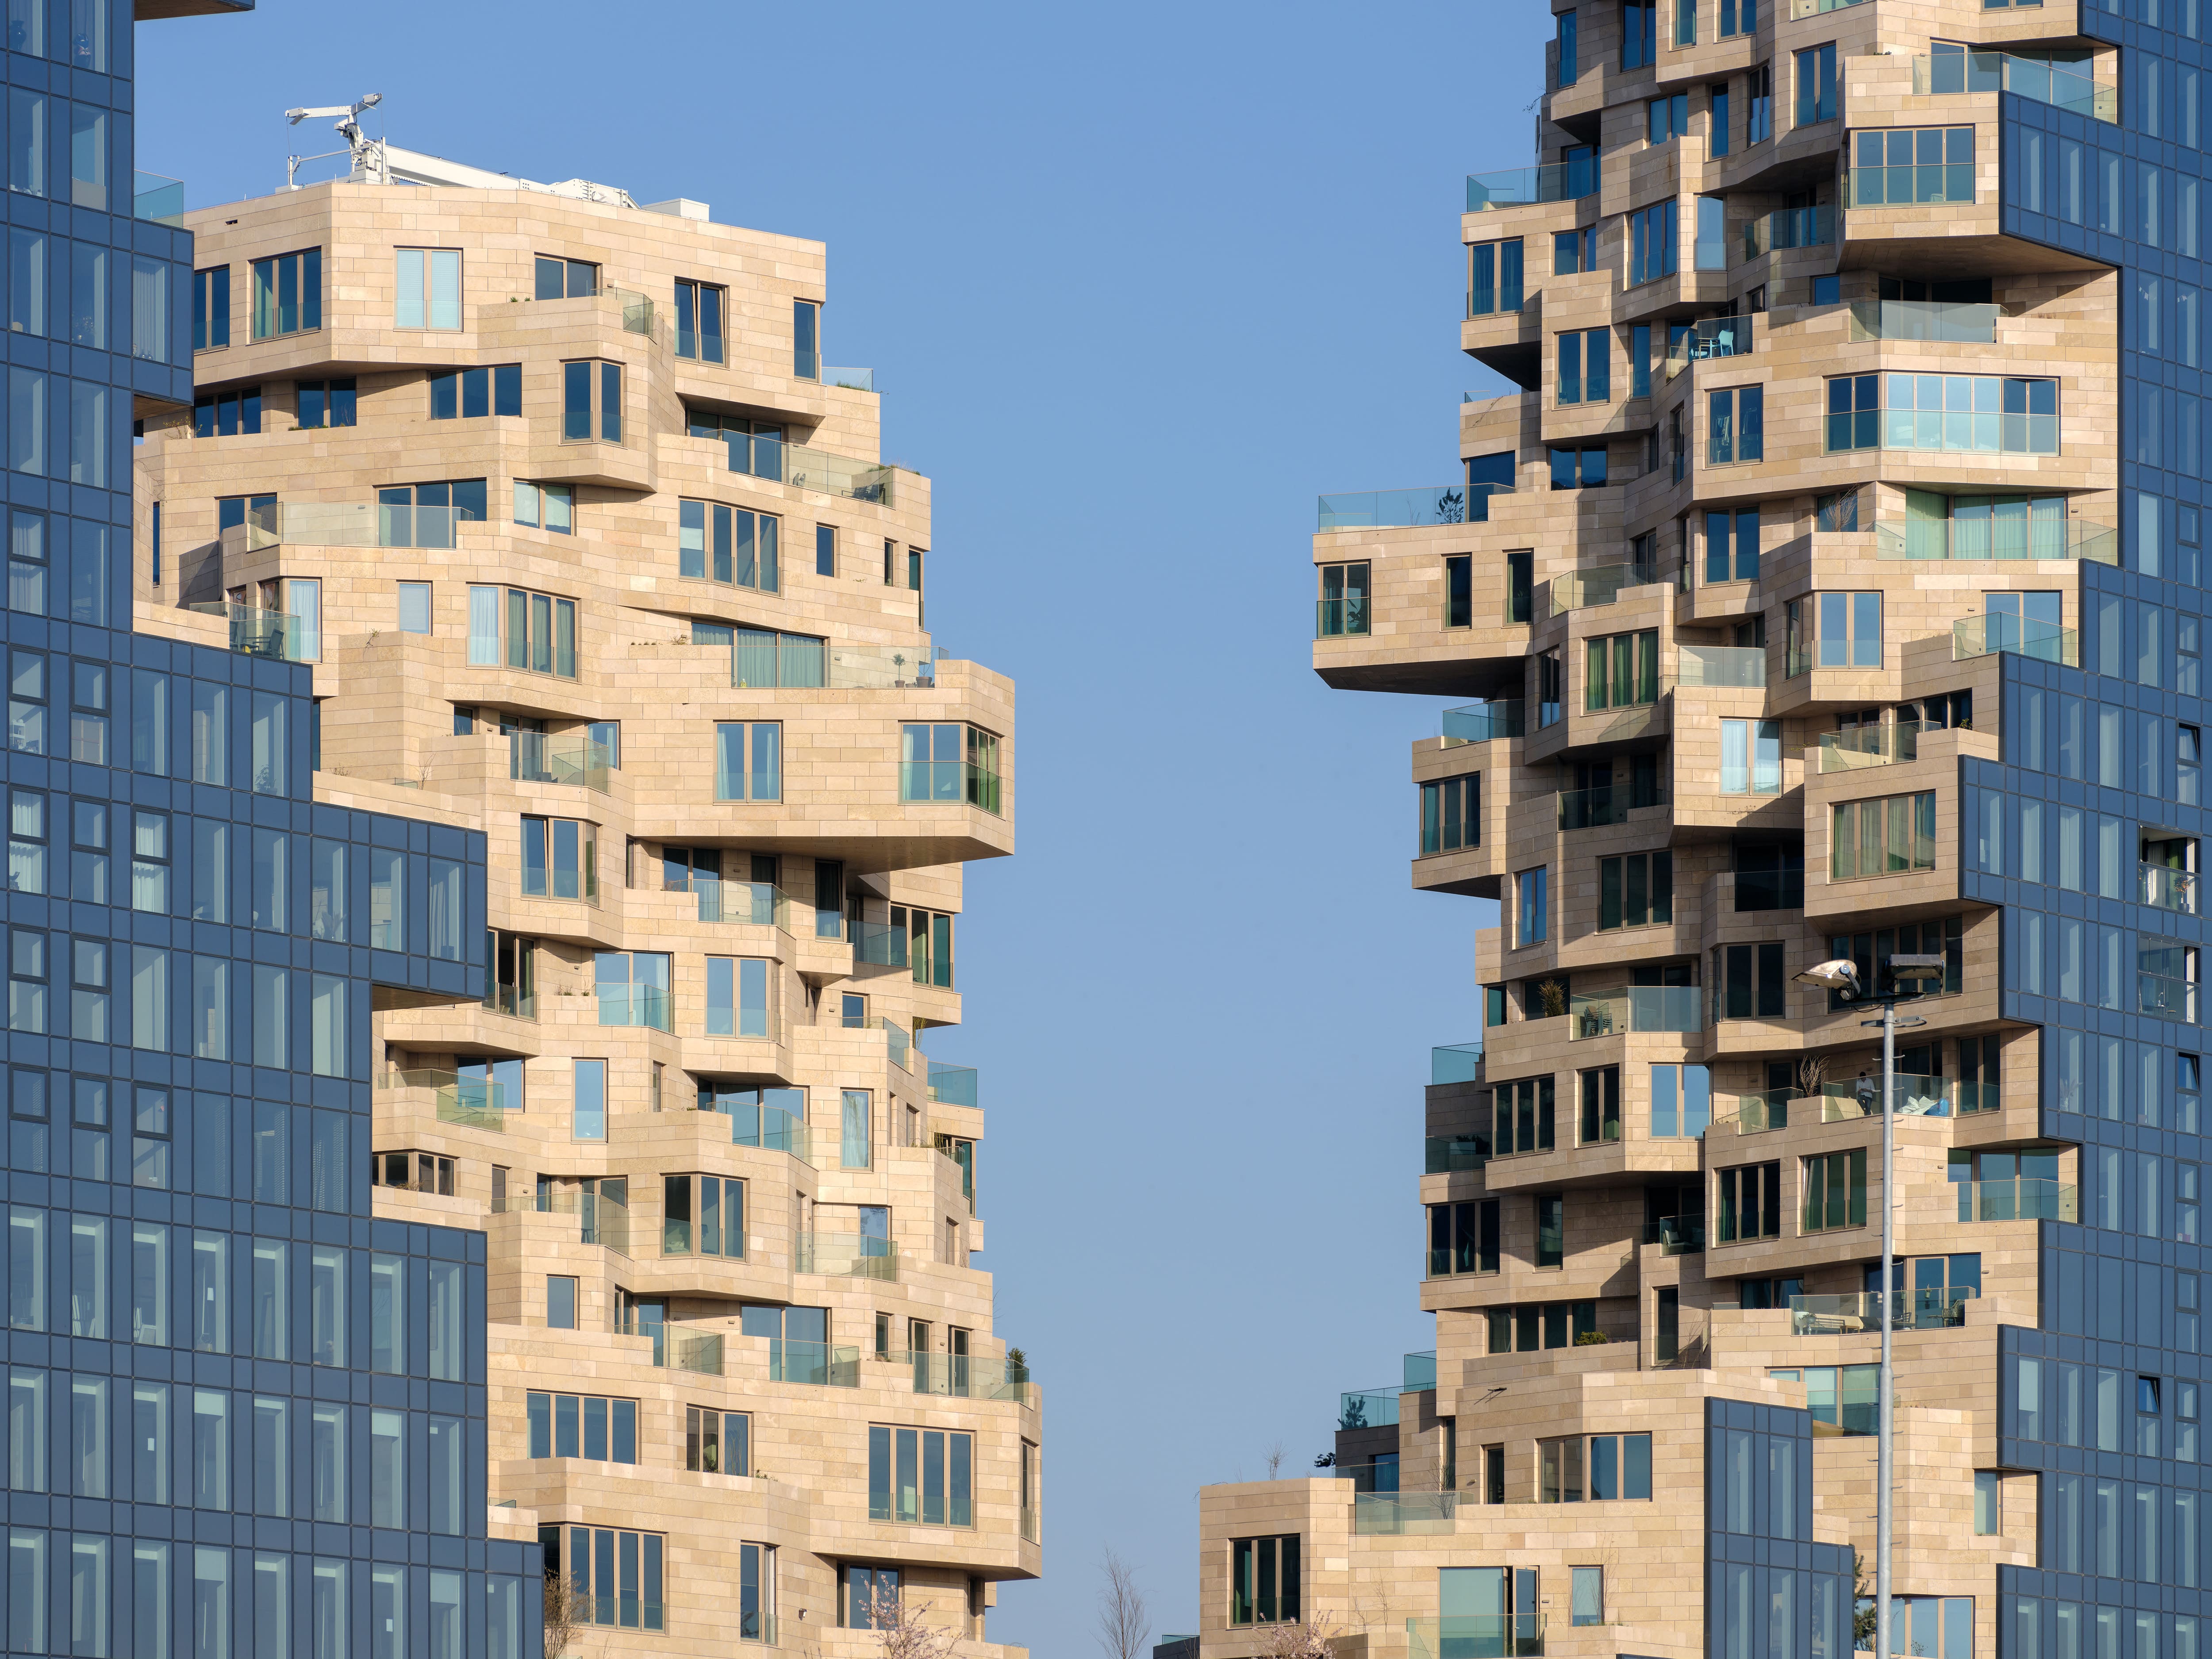 Valley consists of three towers that accommodate 196 apartment units